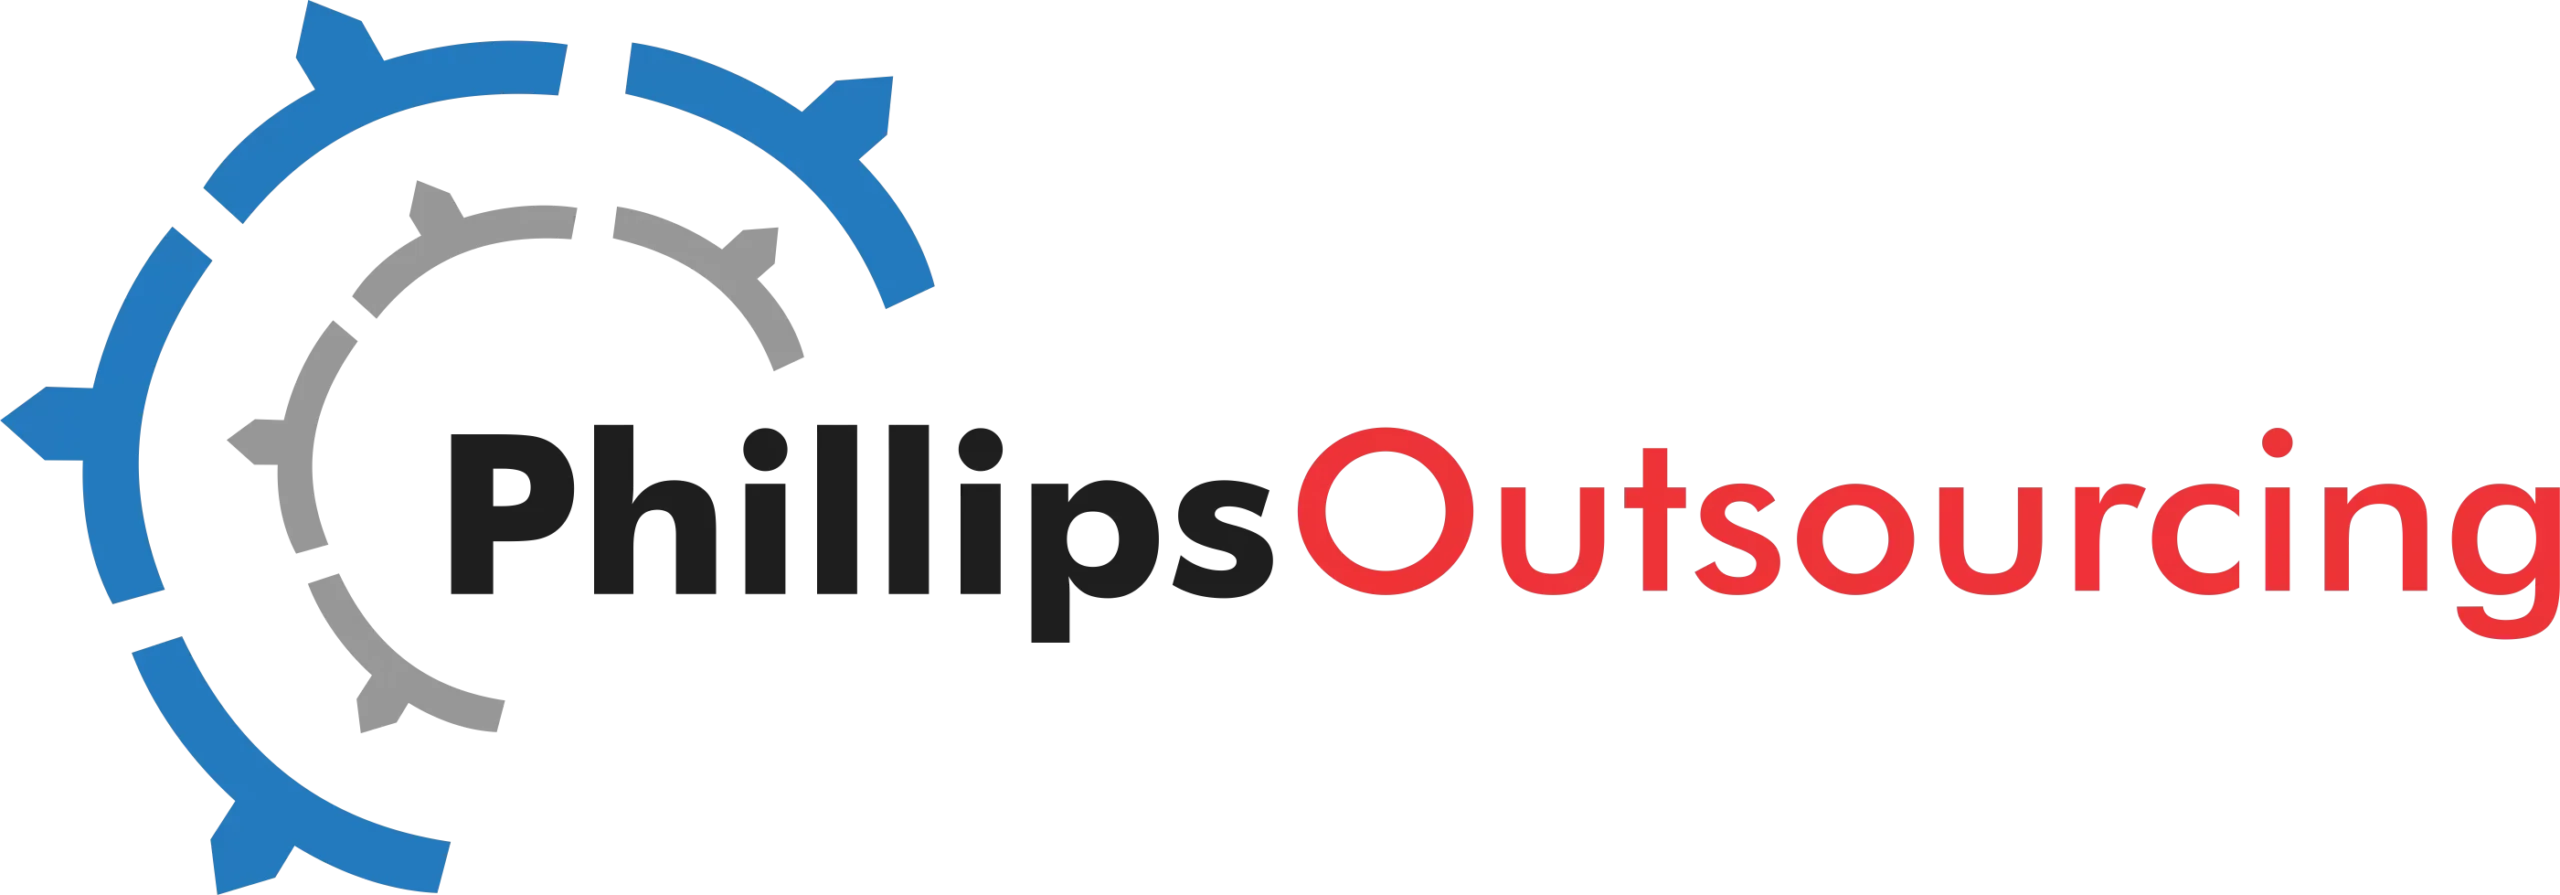 Junior Content Creator at a FinTech Company – Phillips Outsourcing Limited